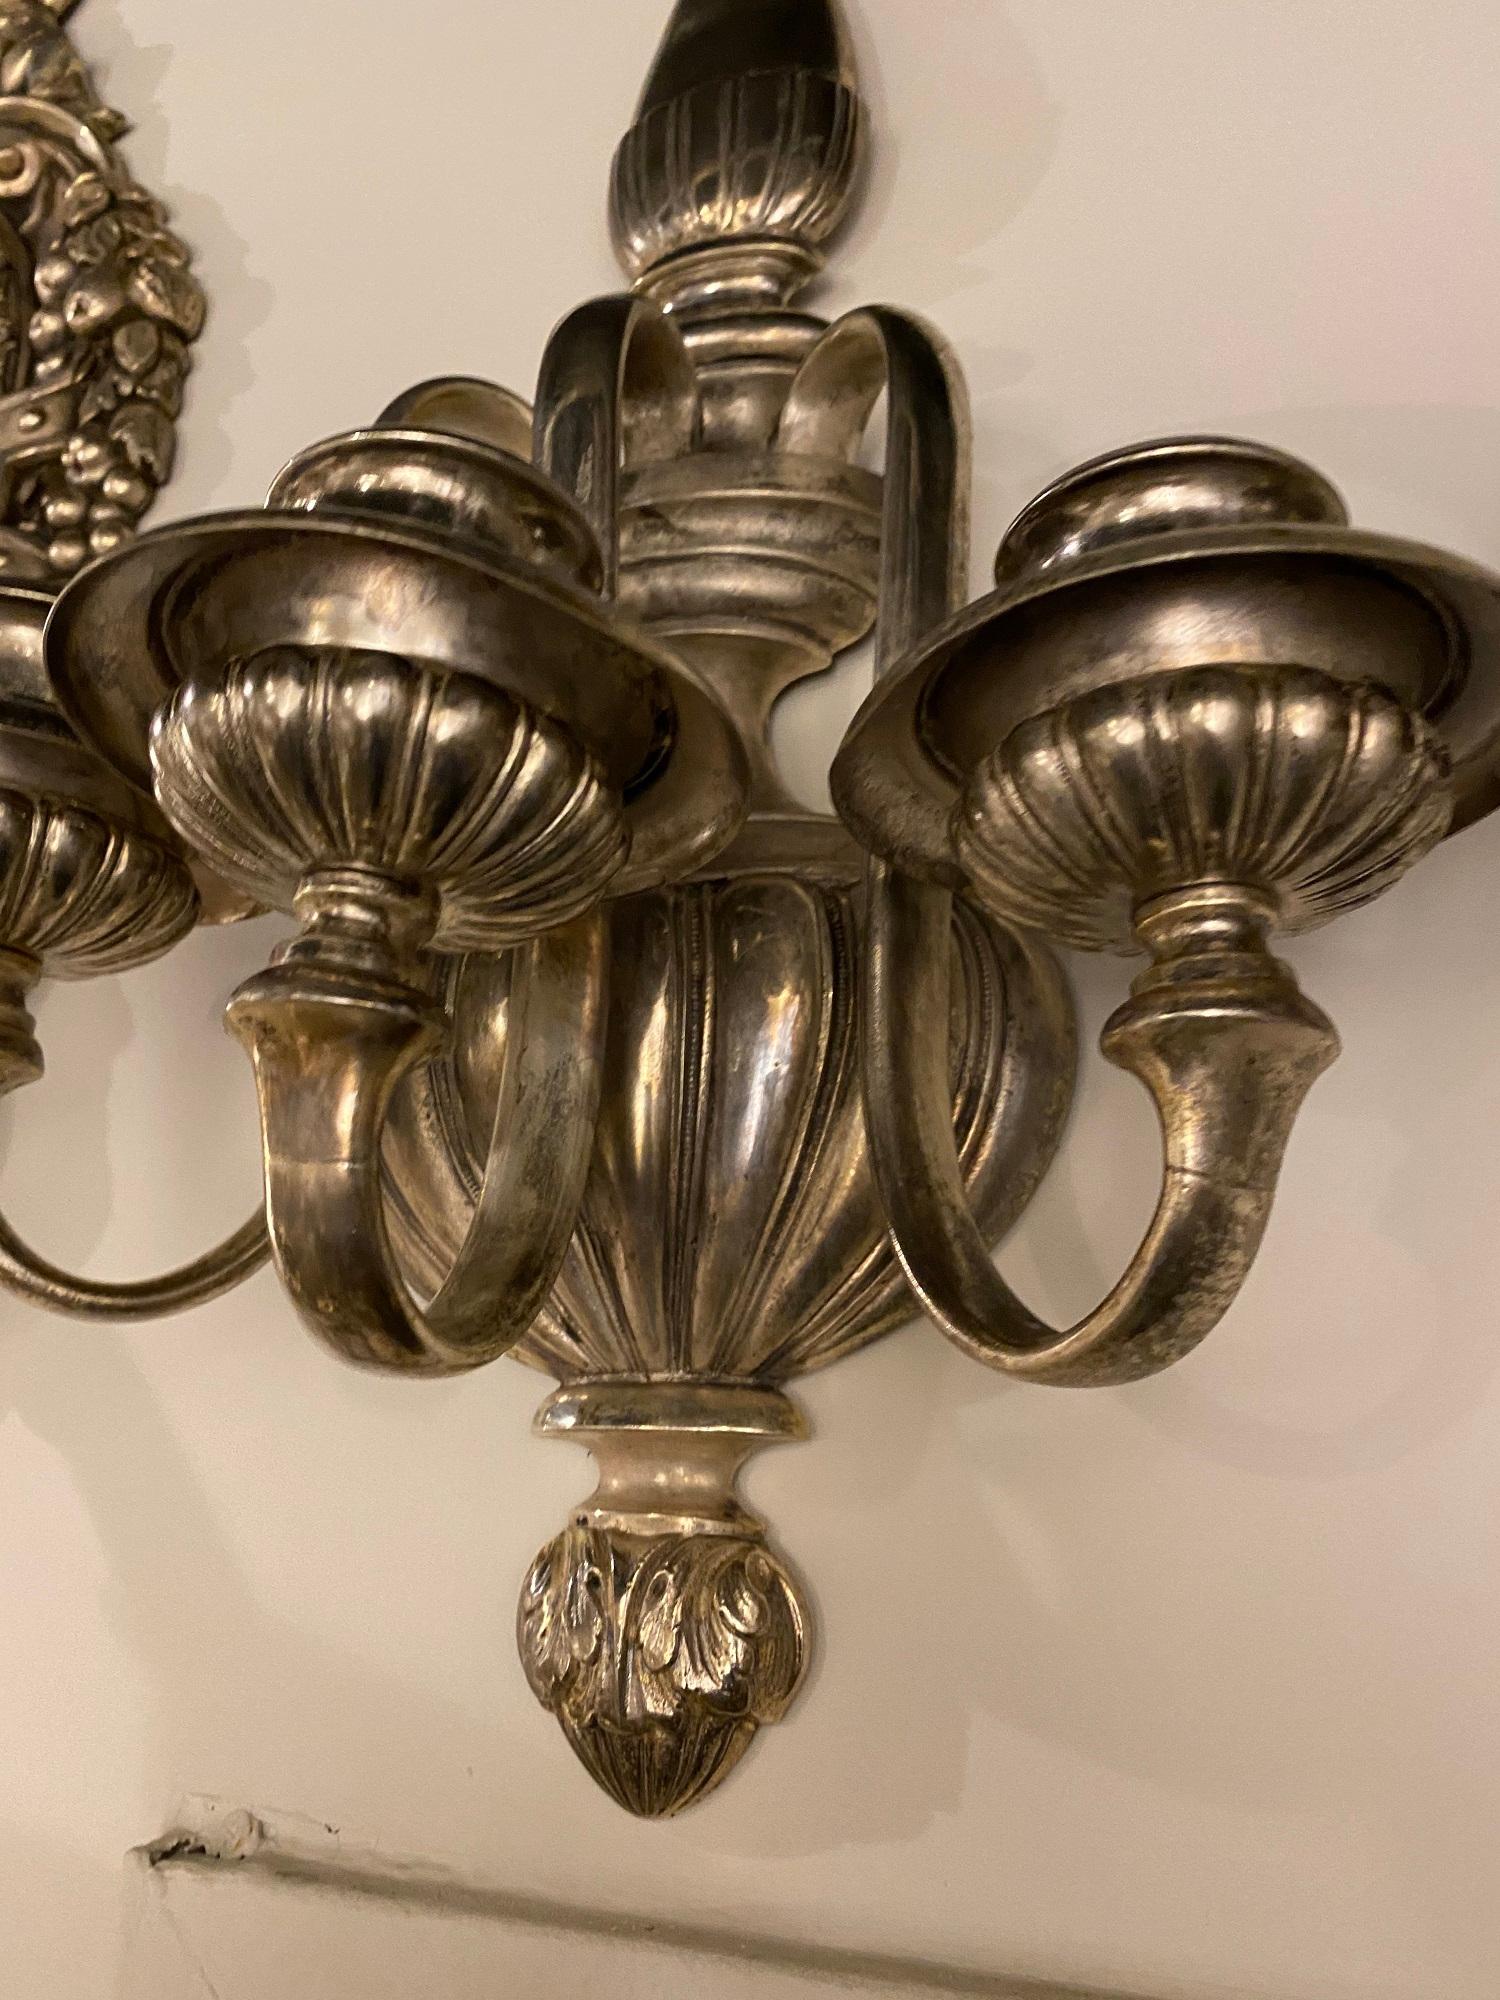 Classique américain 1920s Large Caldwell Silver Plated Sconces with thee lights en vente